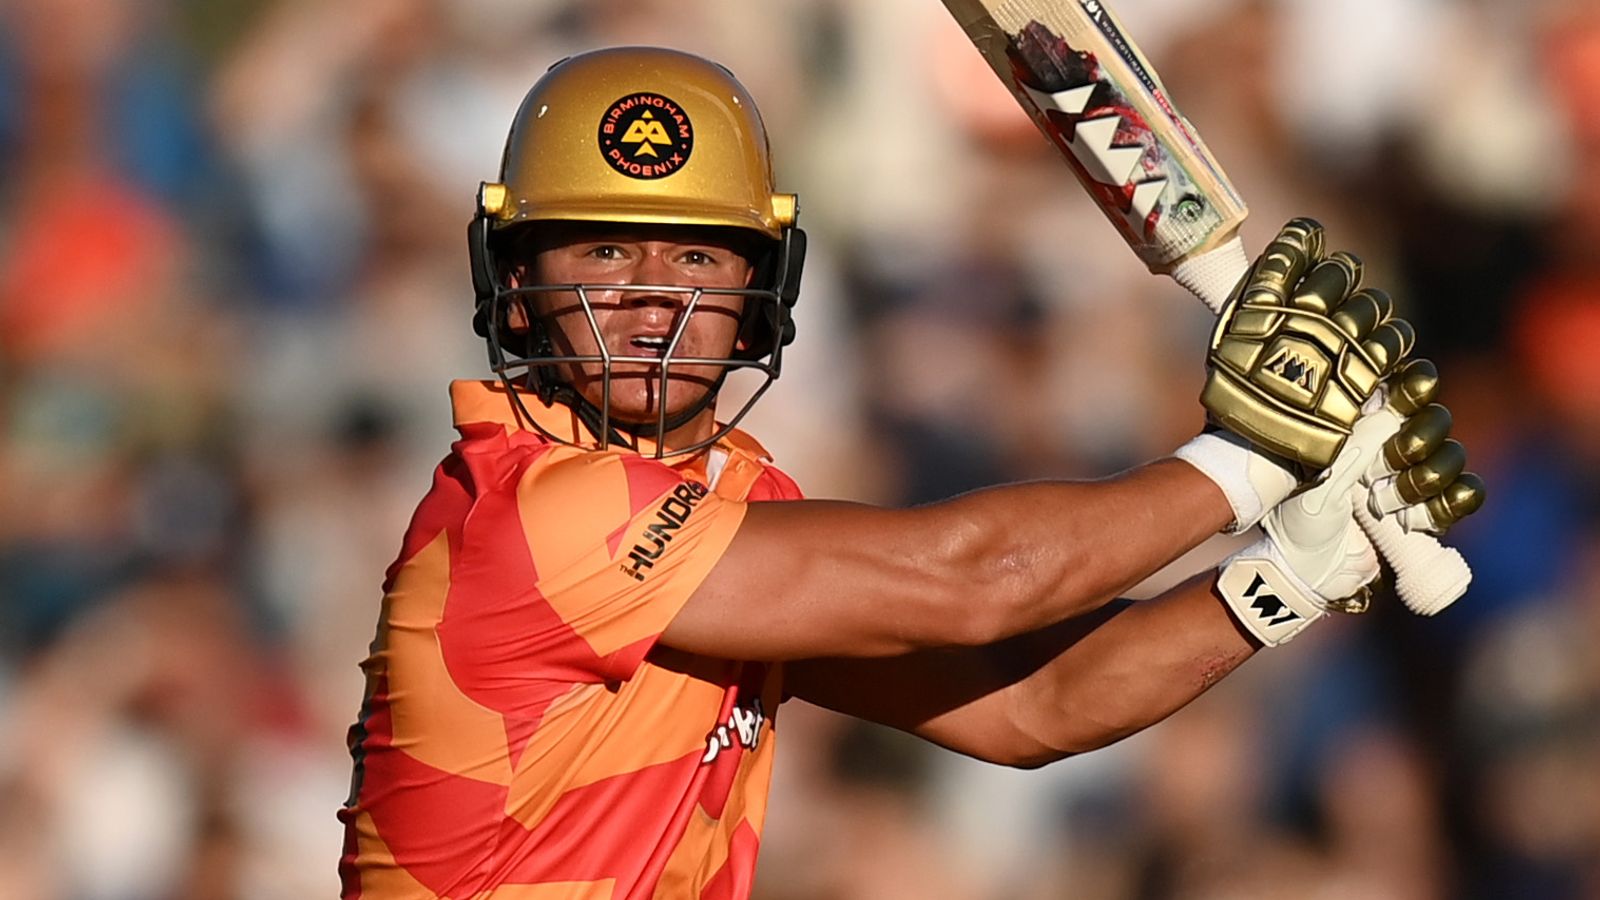 The Hundred: Will Smeed hits first century in competition as Birmingham Phoenix beat Southern Brave